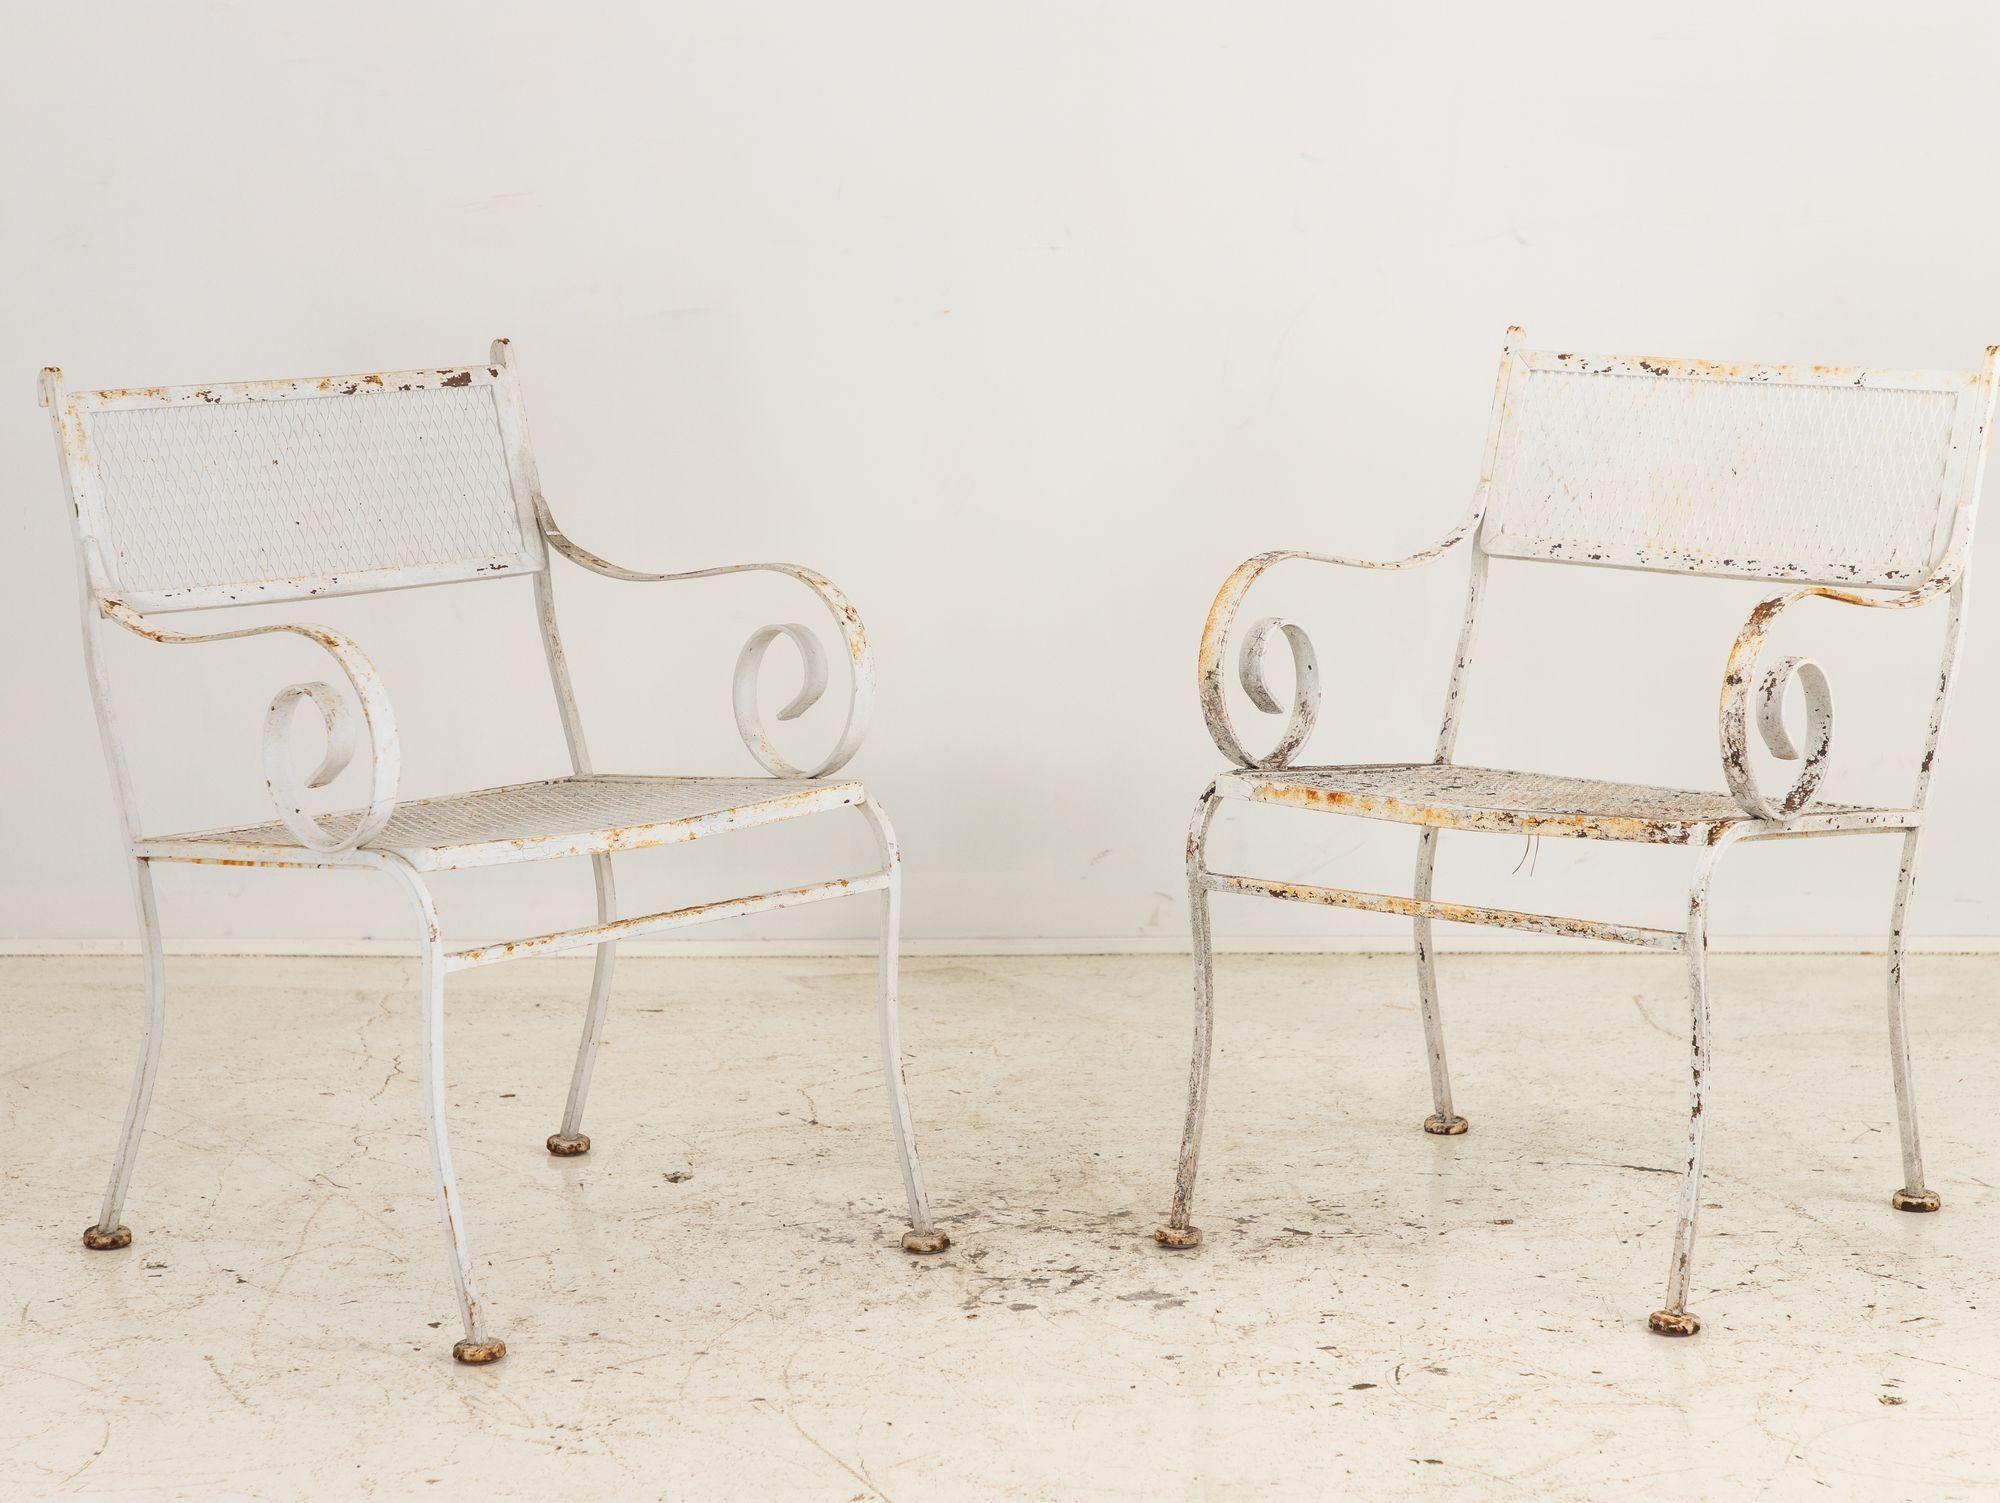 Crafted in the vibrant era of 1950s America, this pair of white-painted iron chairs embodies classic elegance and enduring style. With gracefully scrolled arms and splay legs, they exude sophistication reminiscent of the iconic designs of Woodard